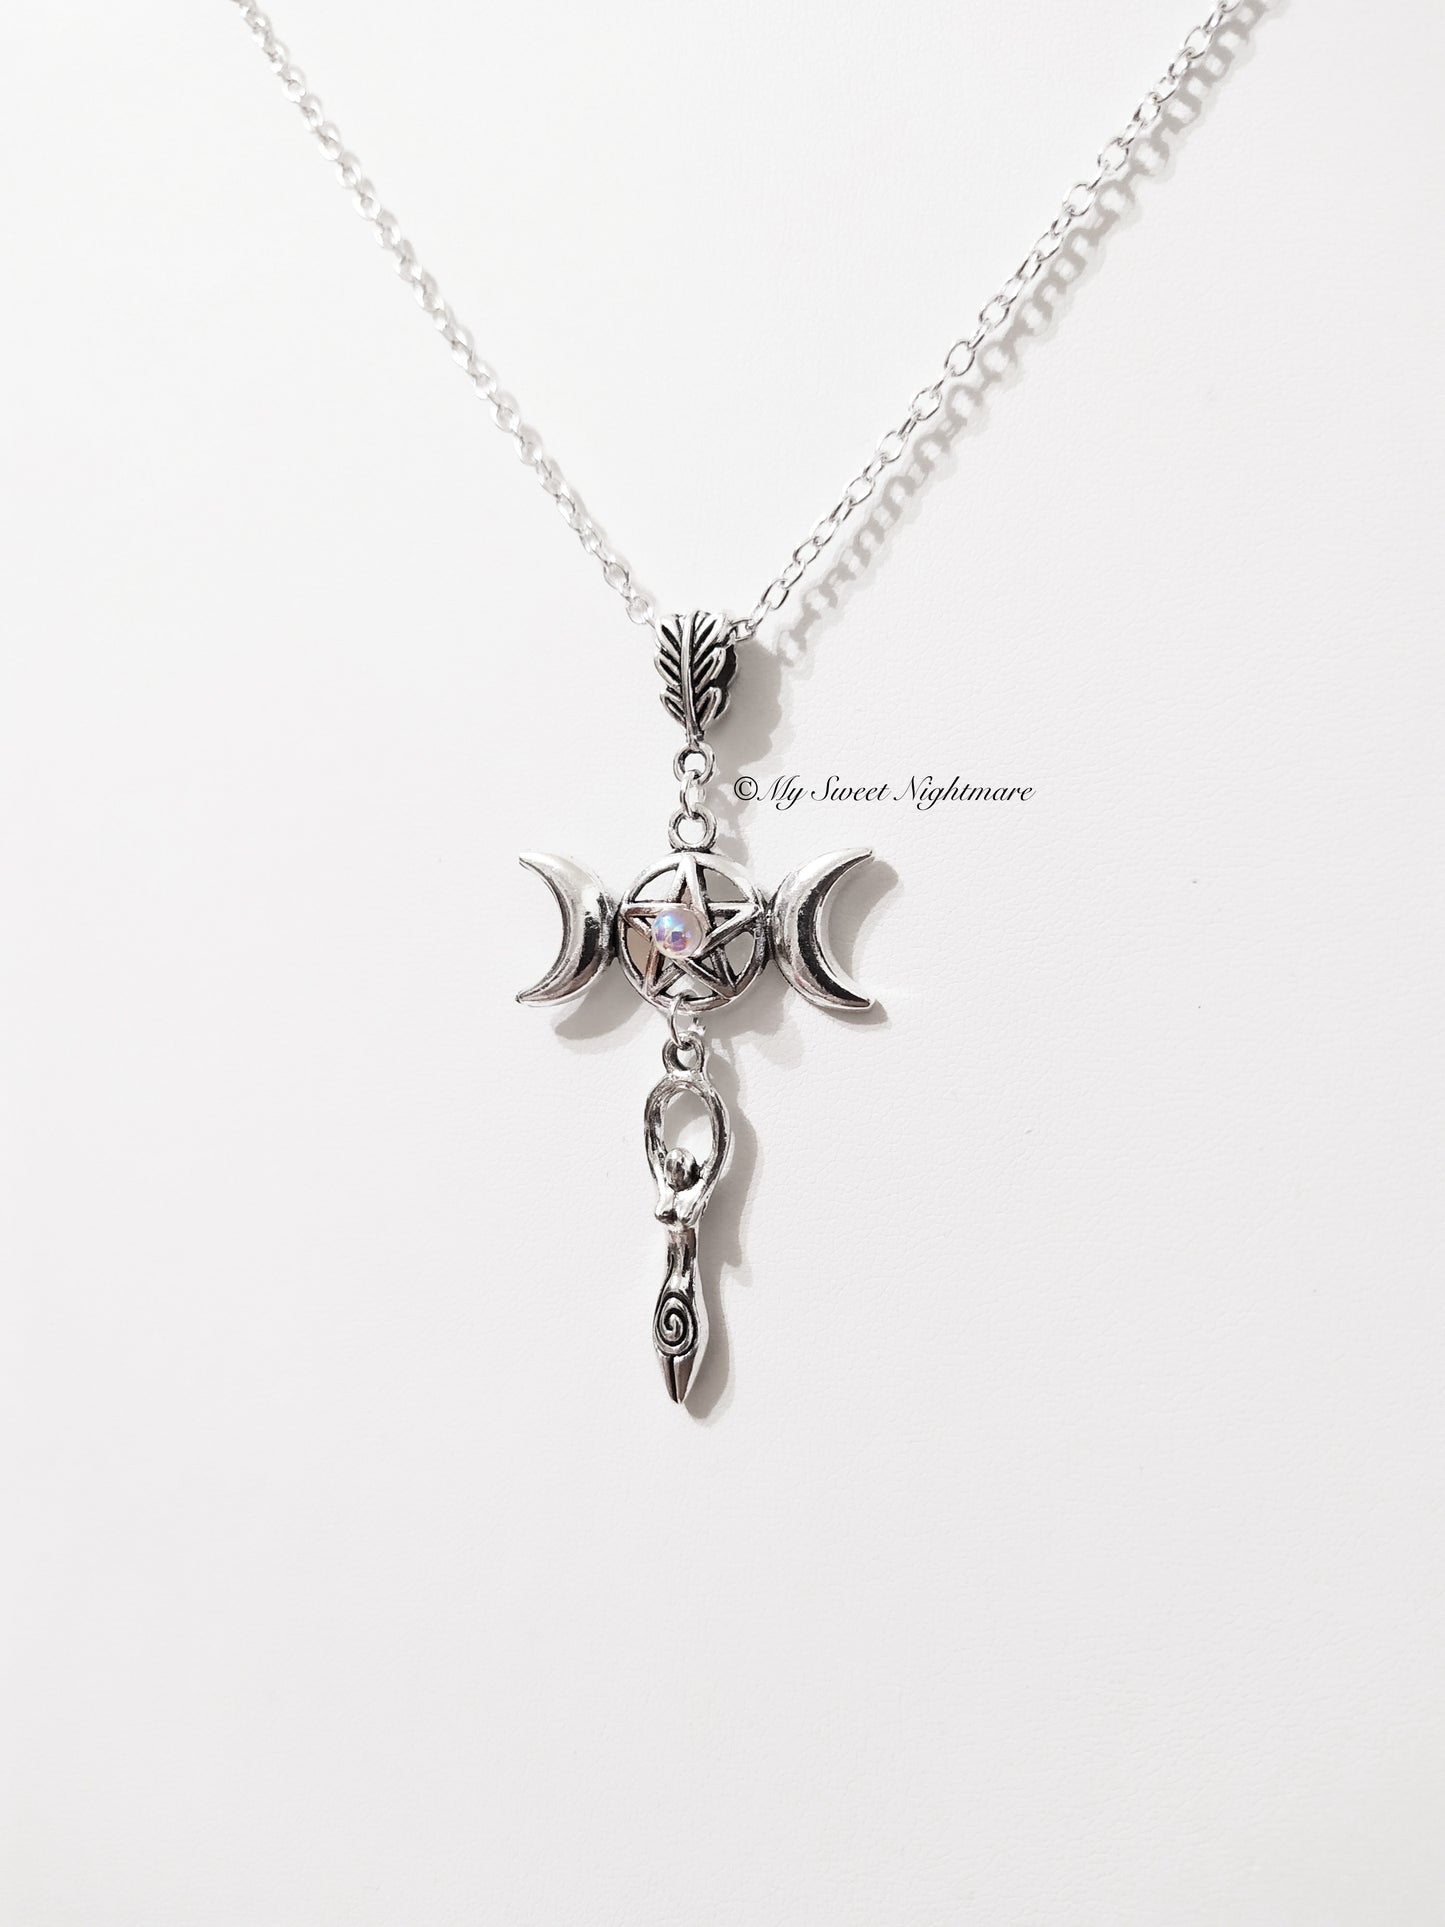 Necklace with Triple Goddess and Pentacle